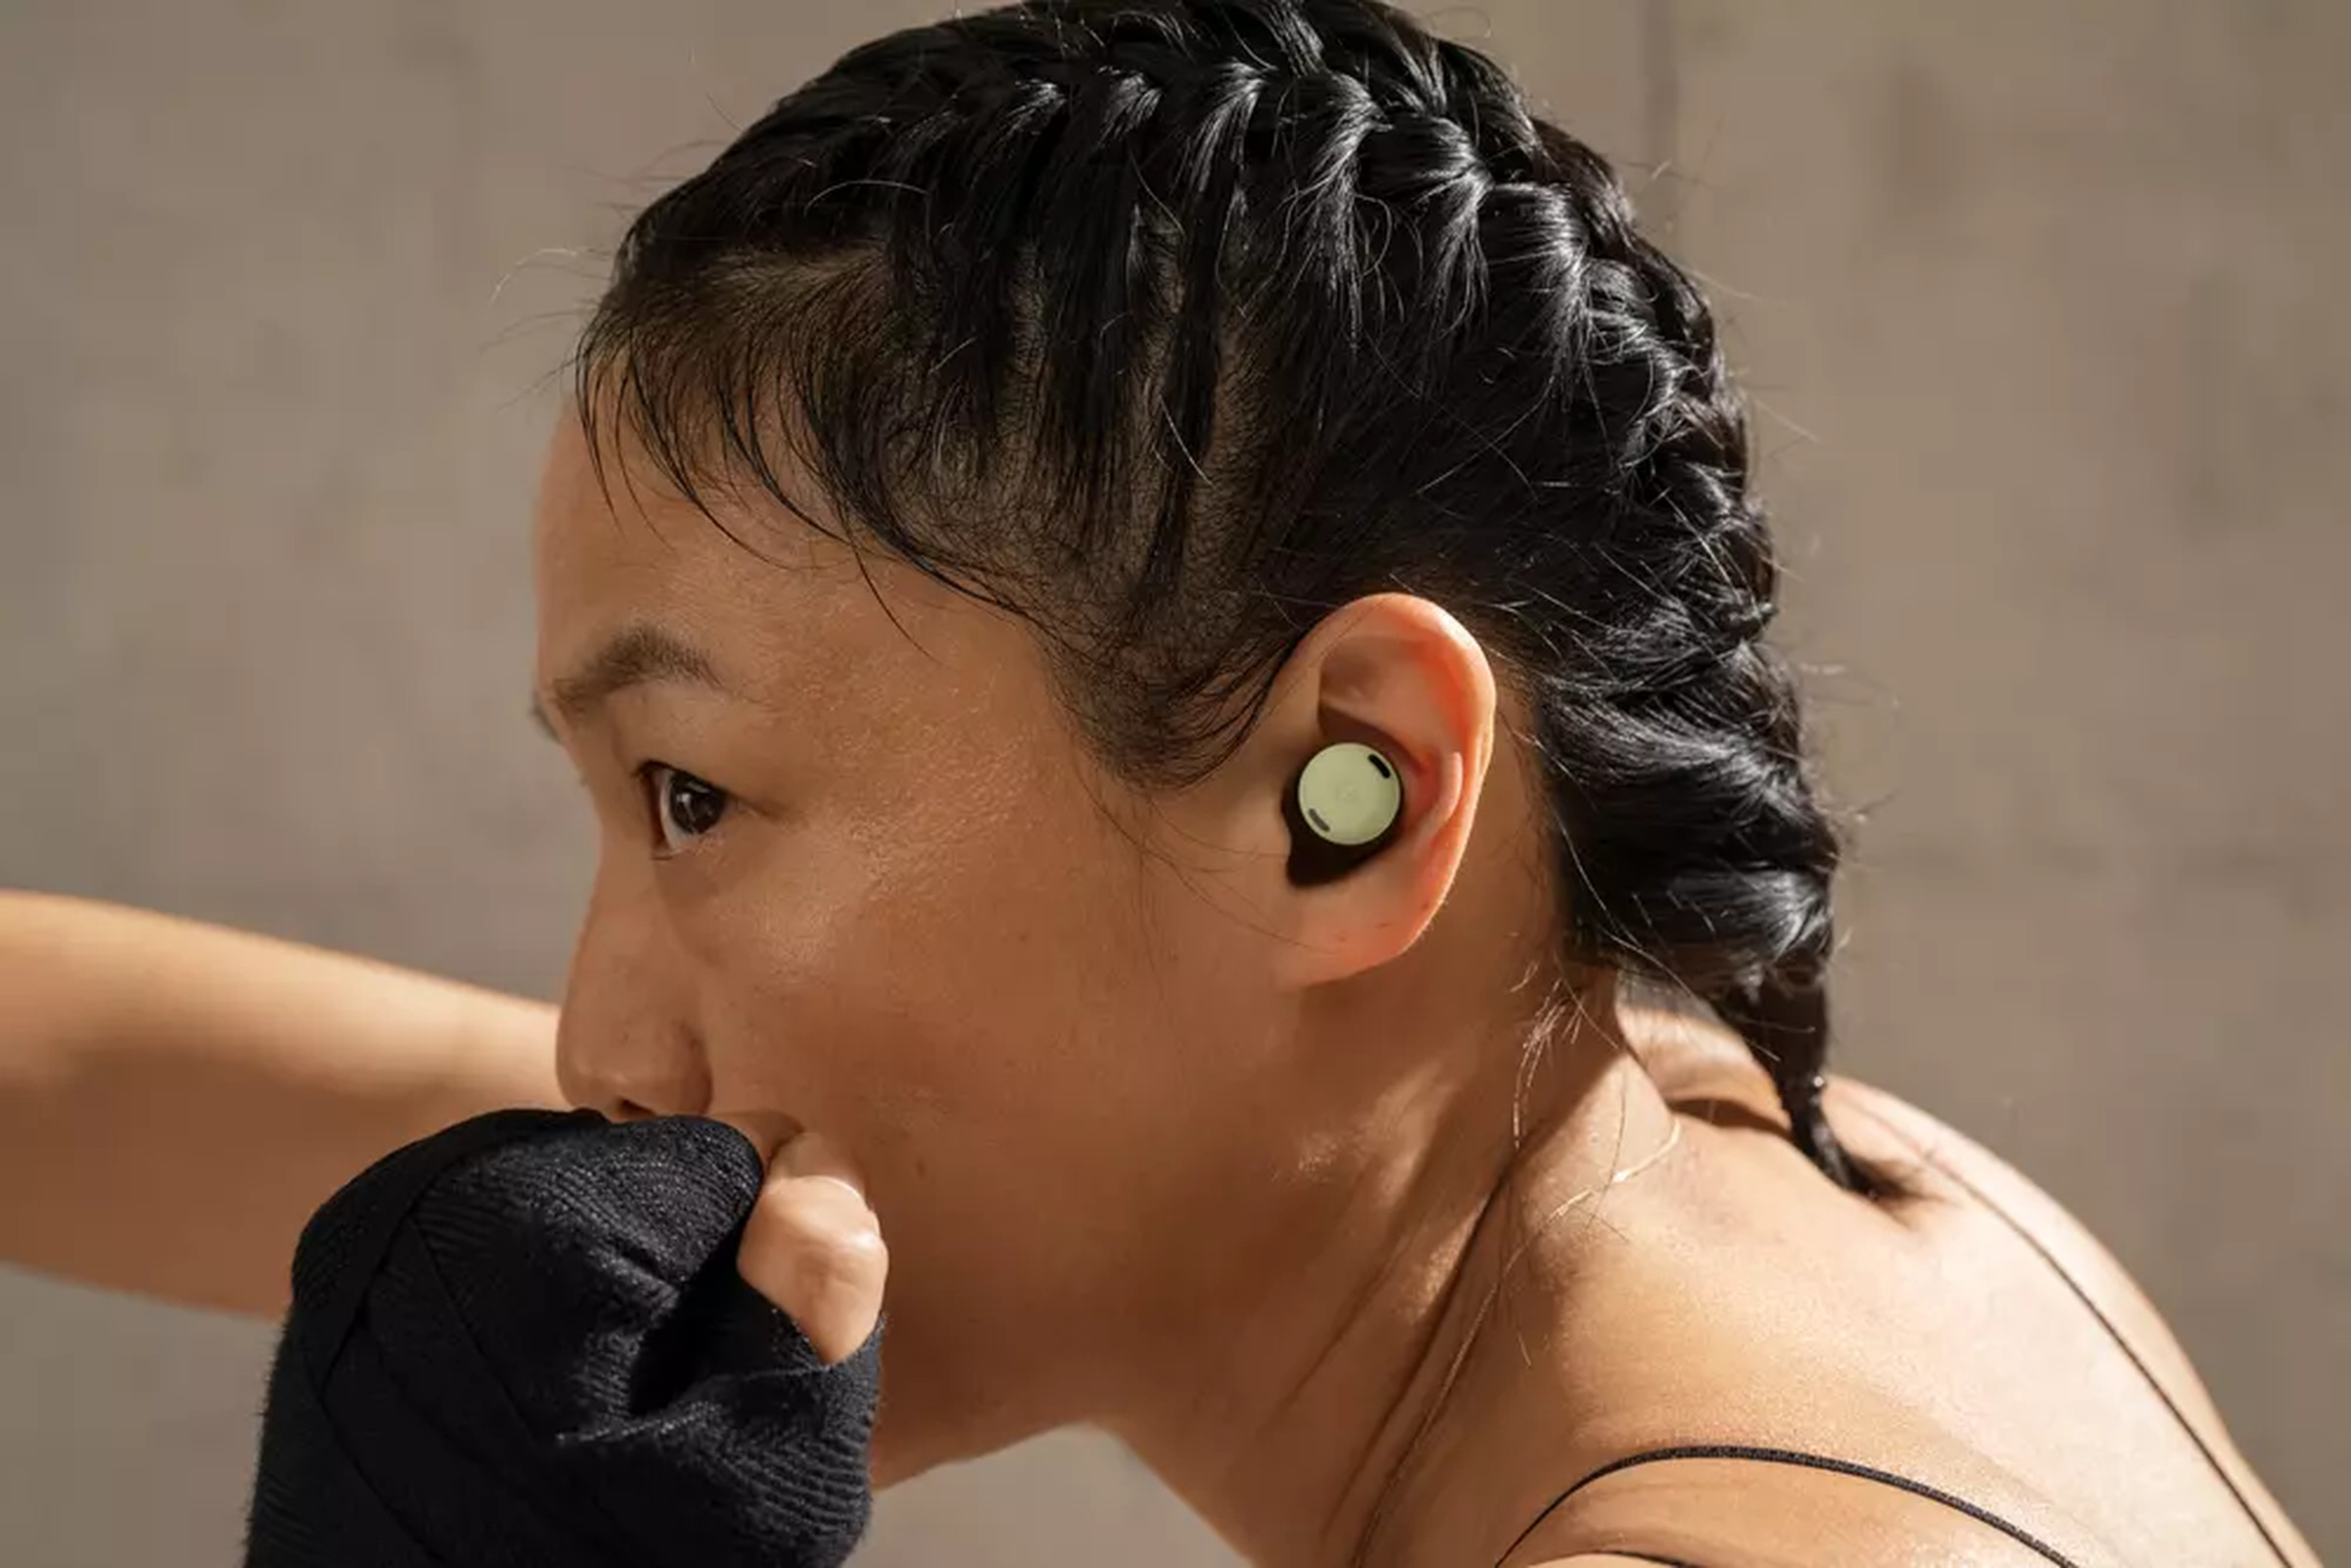 The Pixel Buds Pro offer IPX4 water and sweat resistance.